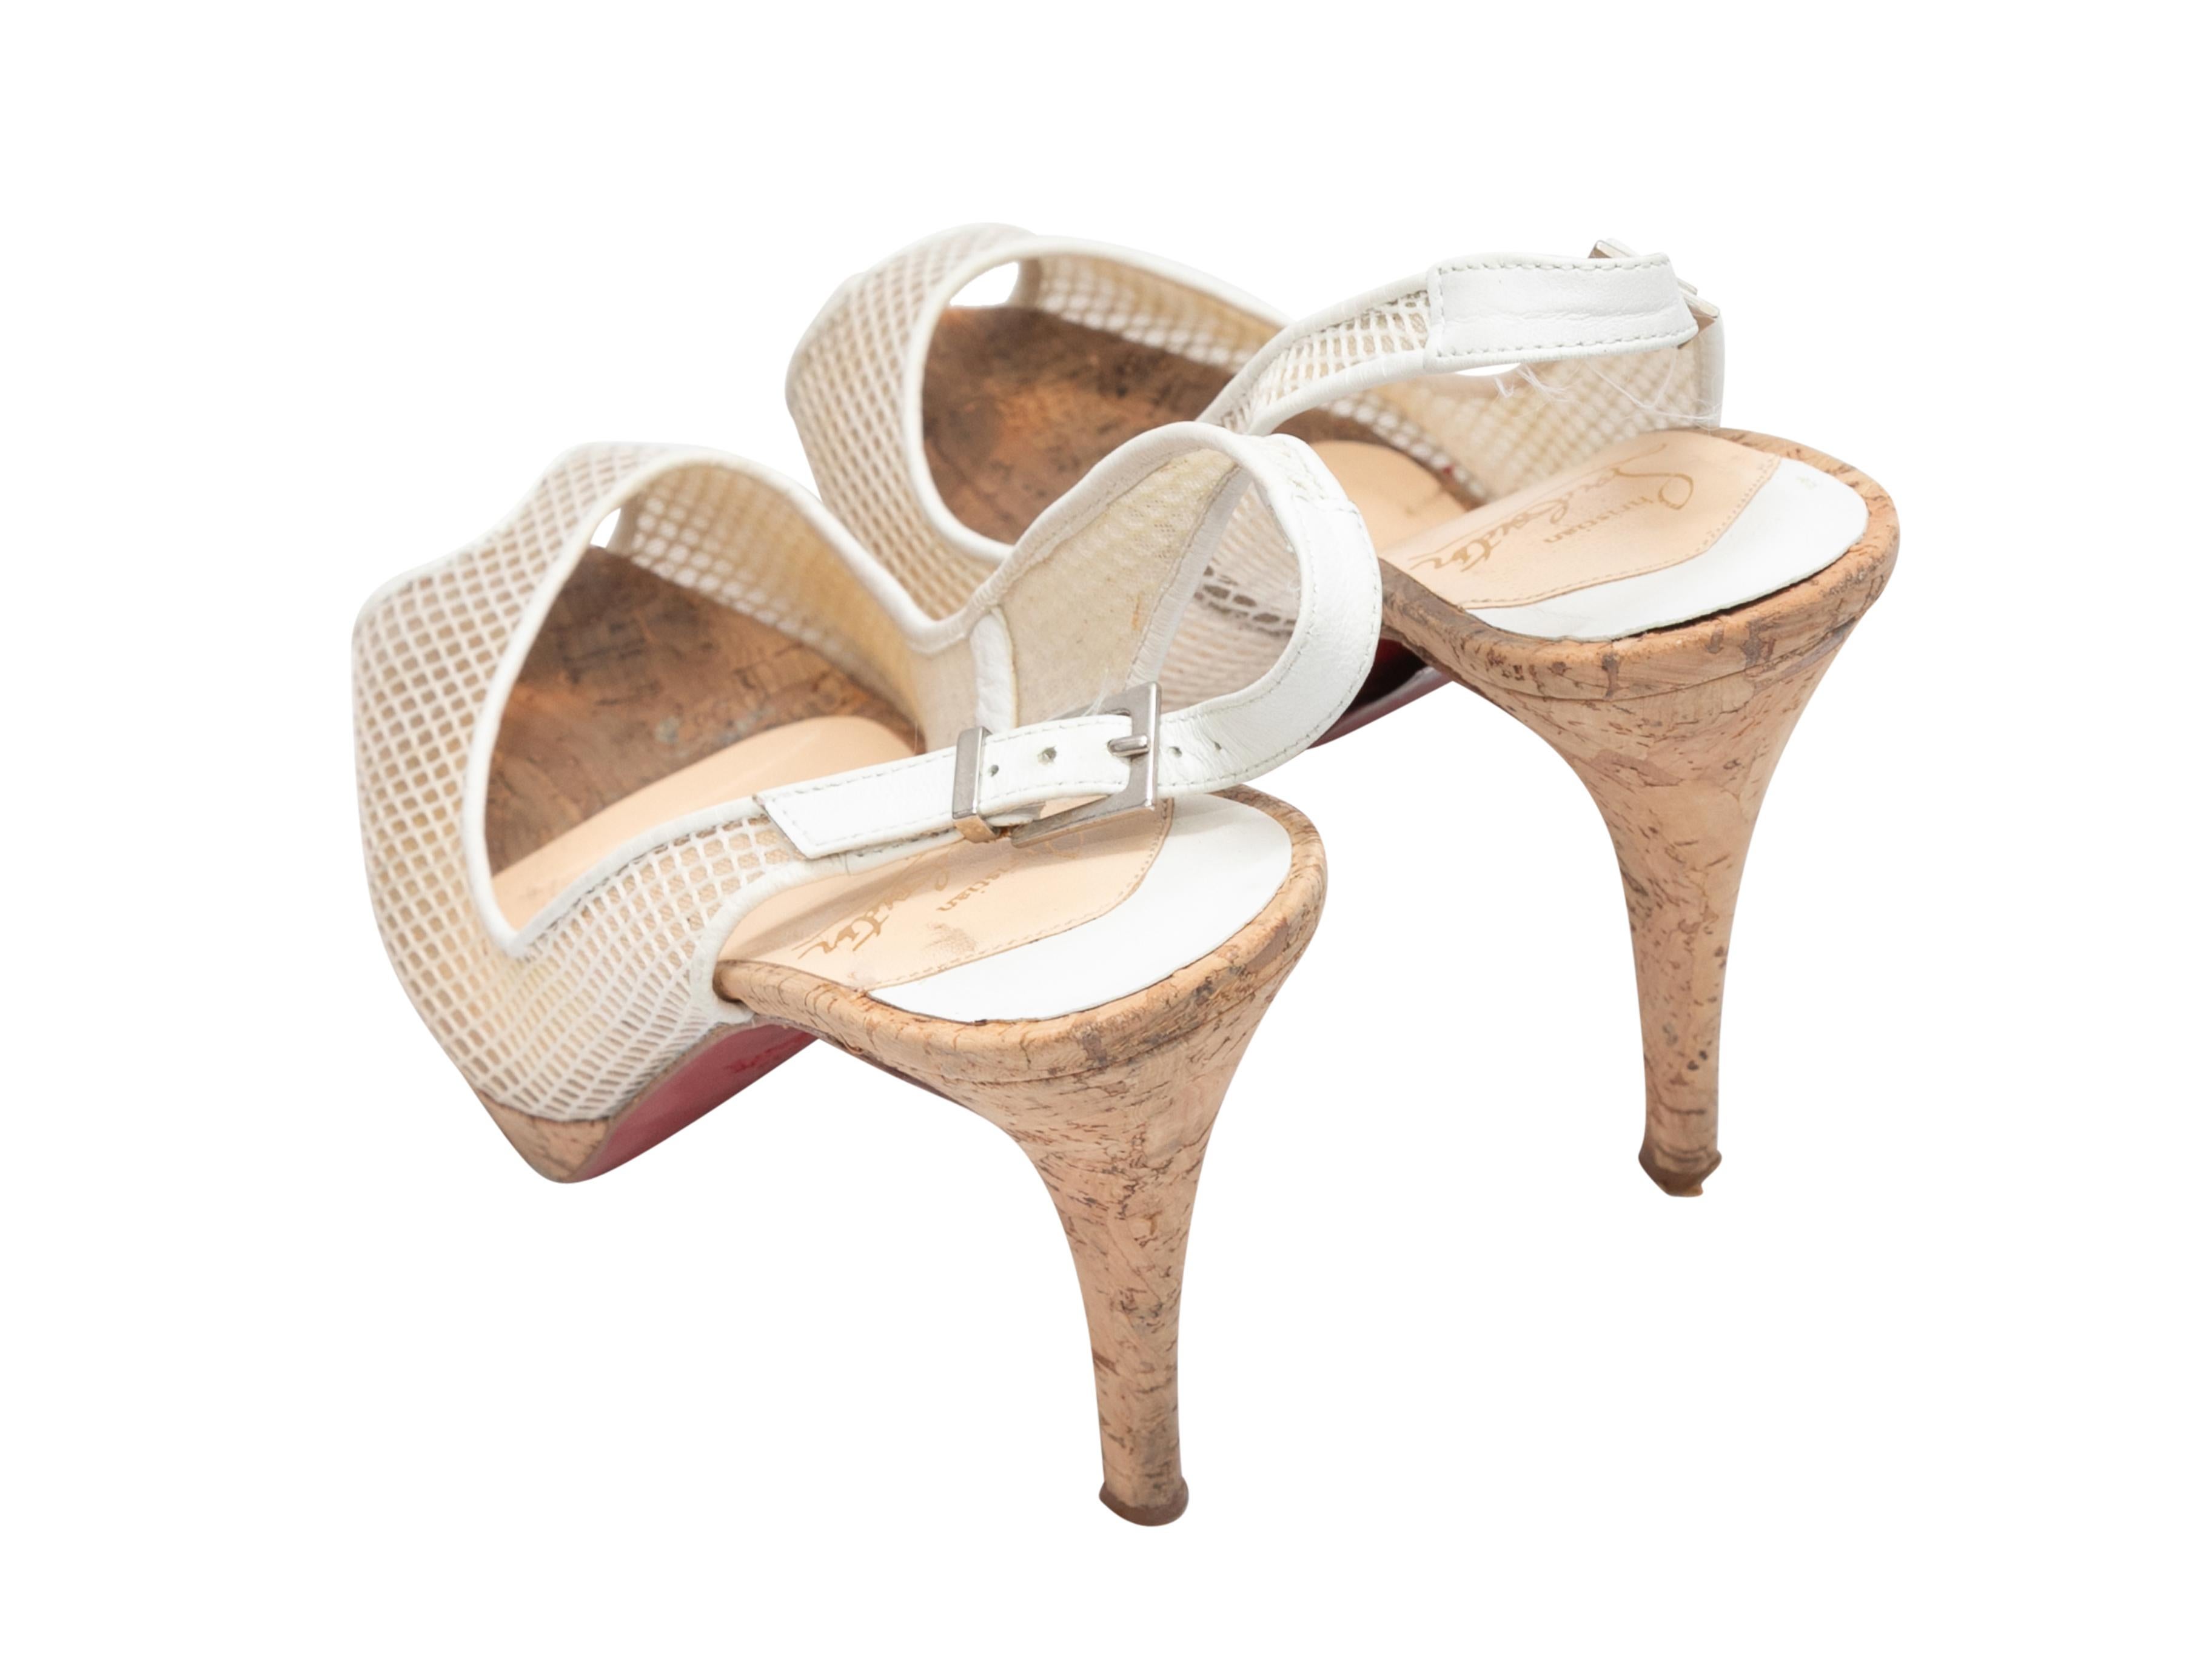 White mesh and cork slingback peep-toe heels by Christian Louboutin. Buckle closures at slingback straps. 4.5